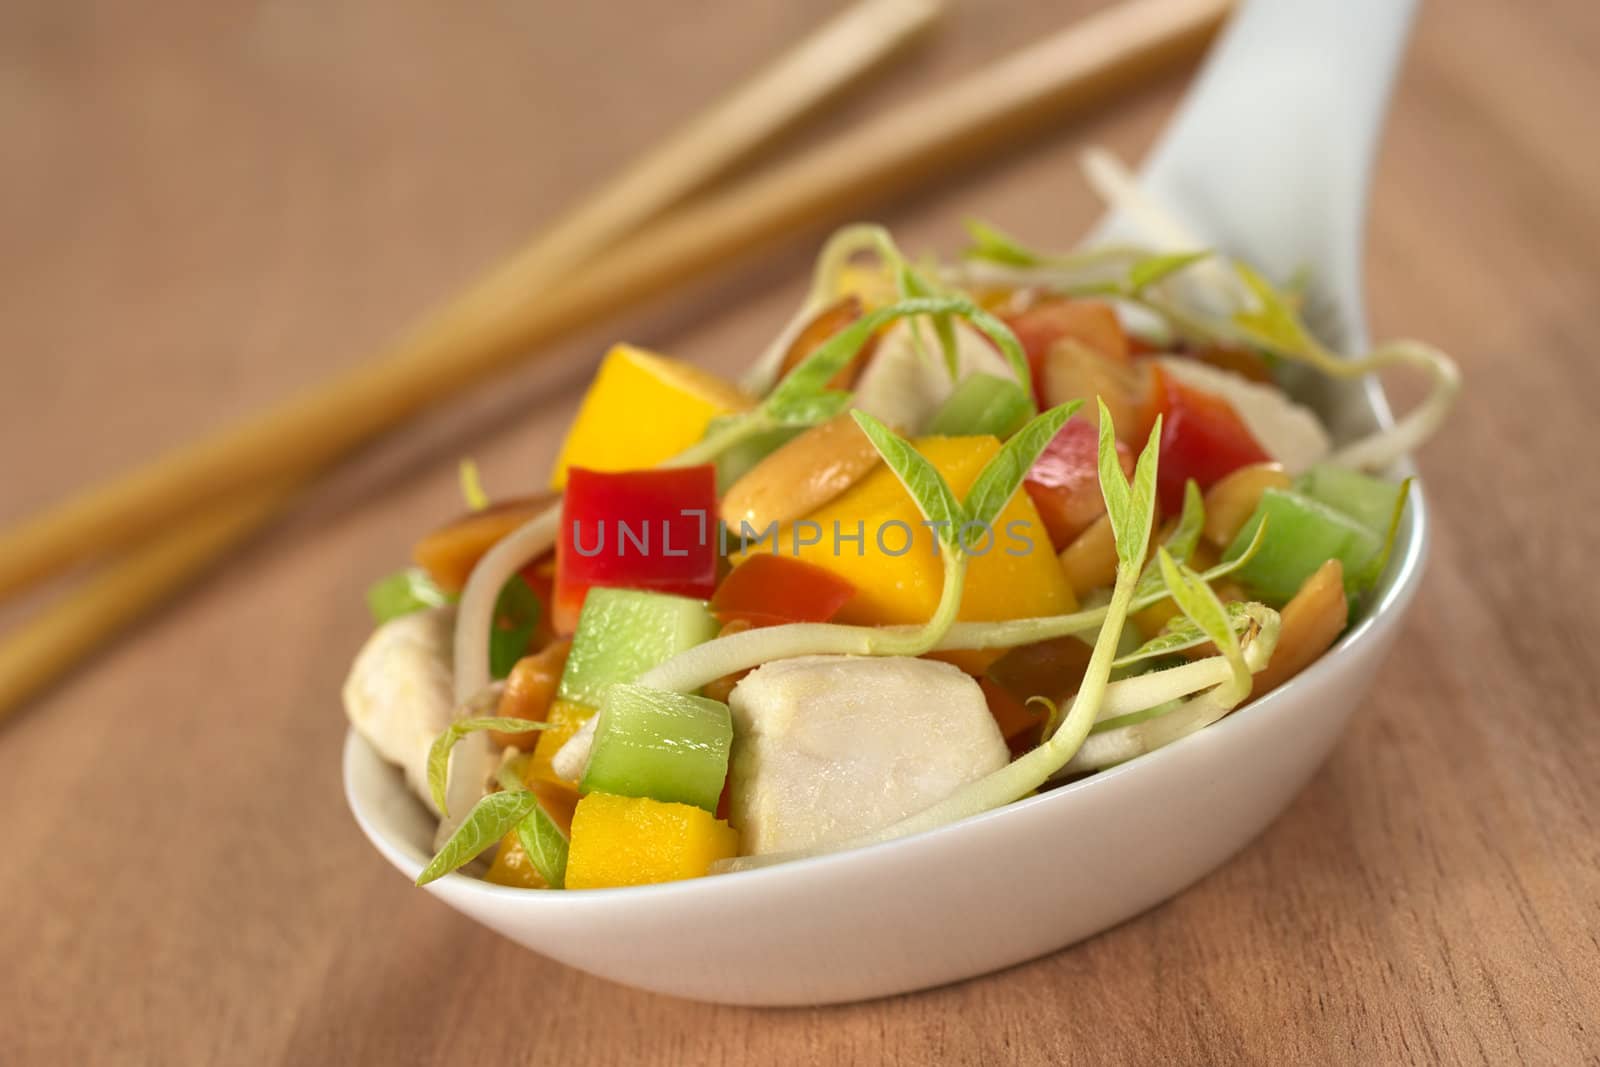 Fresh Asian salad with chicken, mango, cucumber, bean sprouts, red bell pepper and peanuts on white ceramic spoon with wooden chopsticks in the back (Selective Focus, Focus on the front of the food)